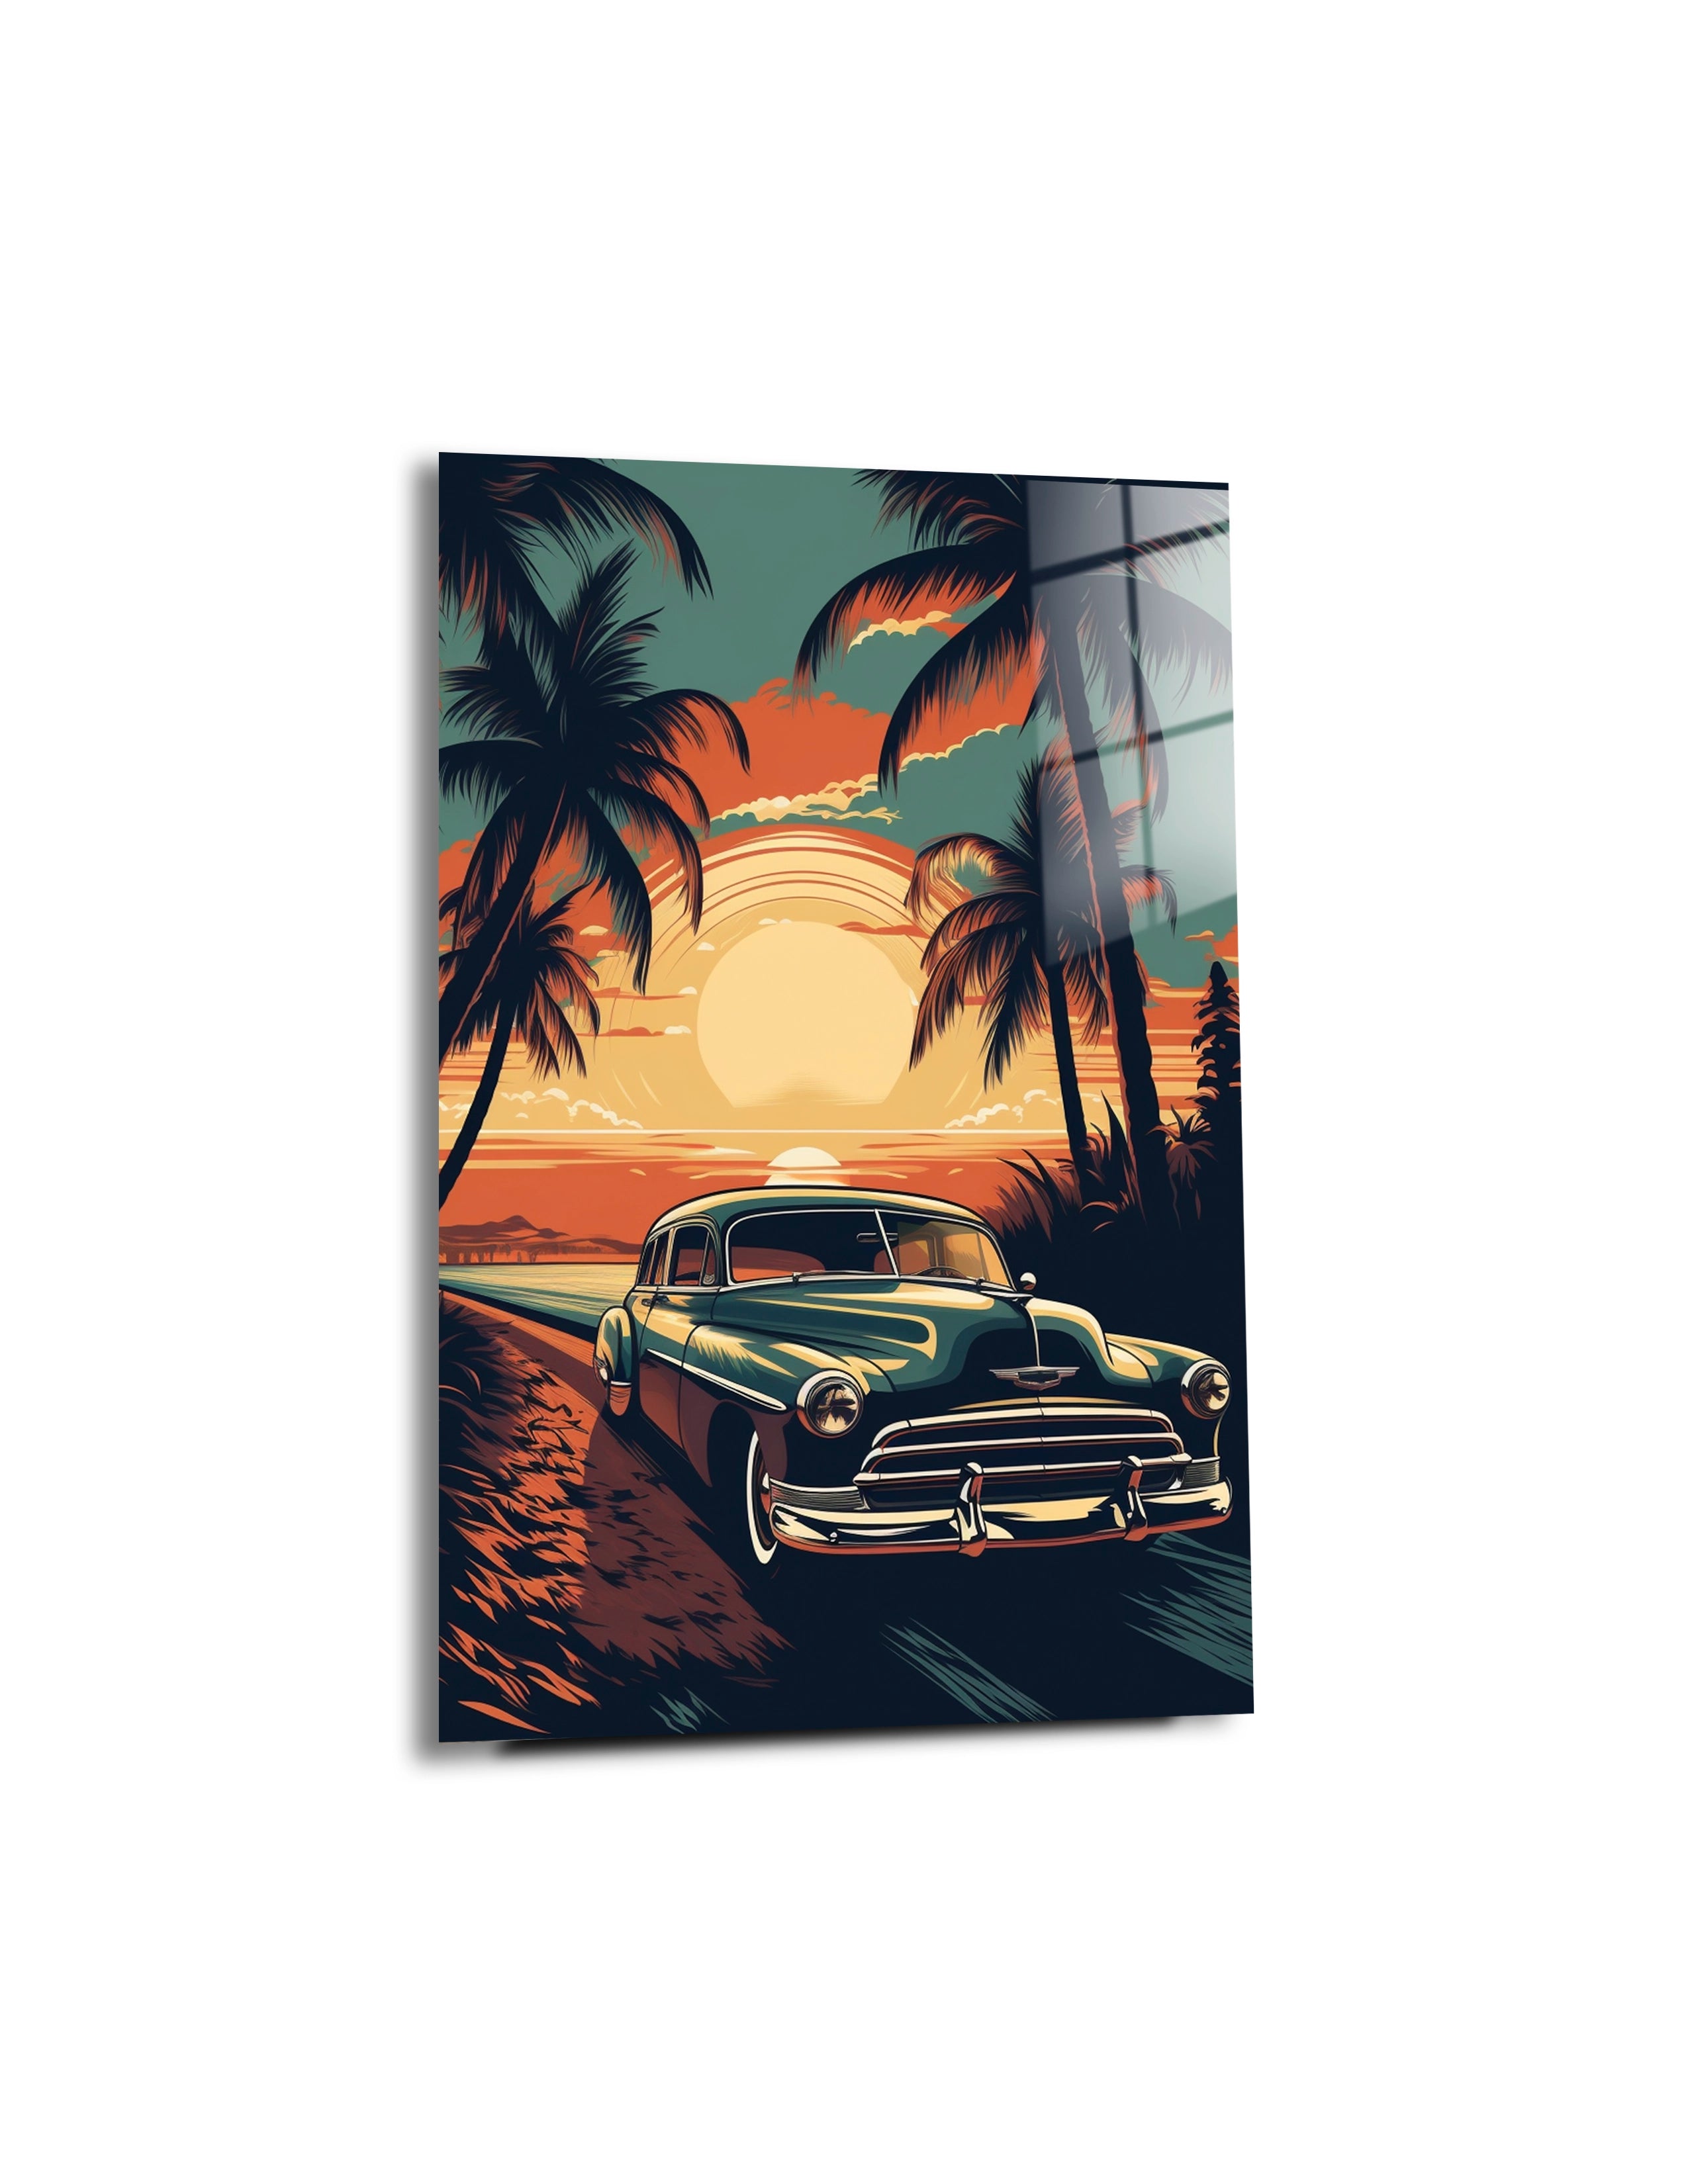 Painting Car Road With PalmTrees Background